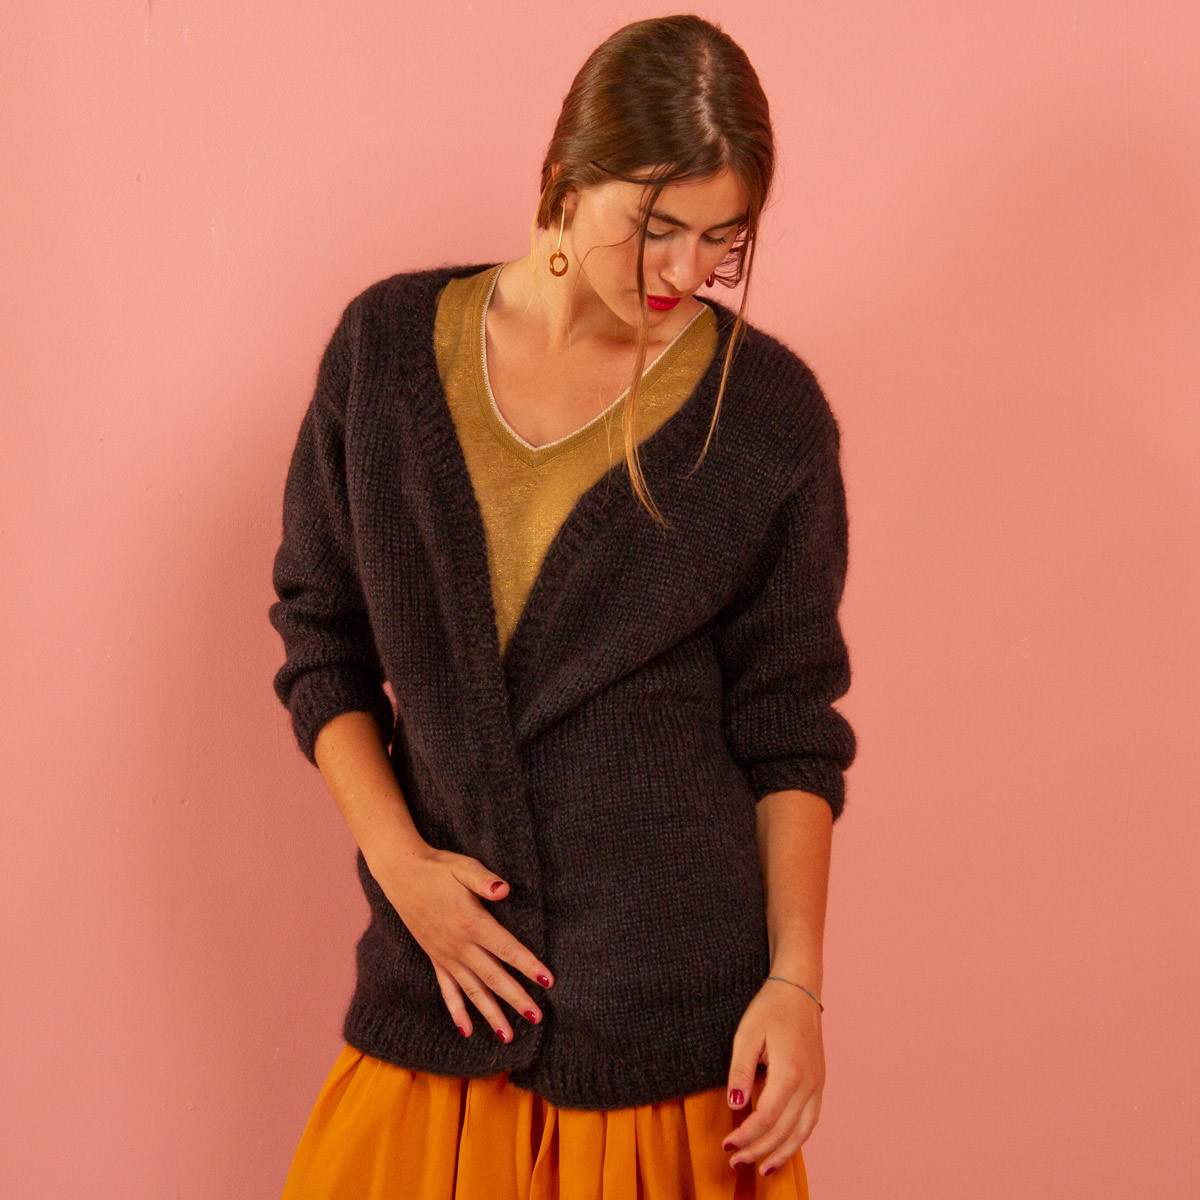 Lily Cardigan by Petite Biche Rose